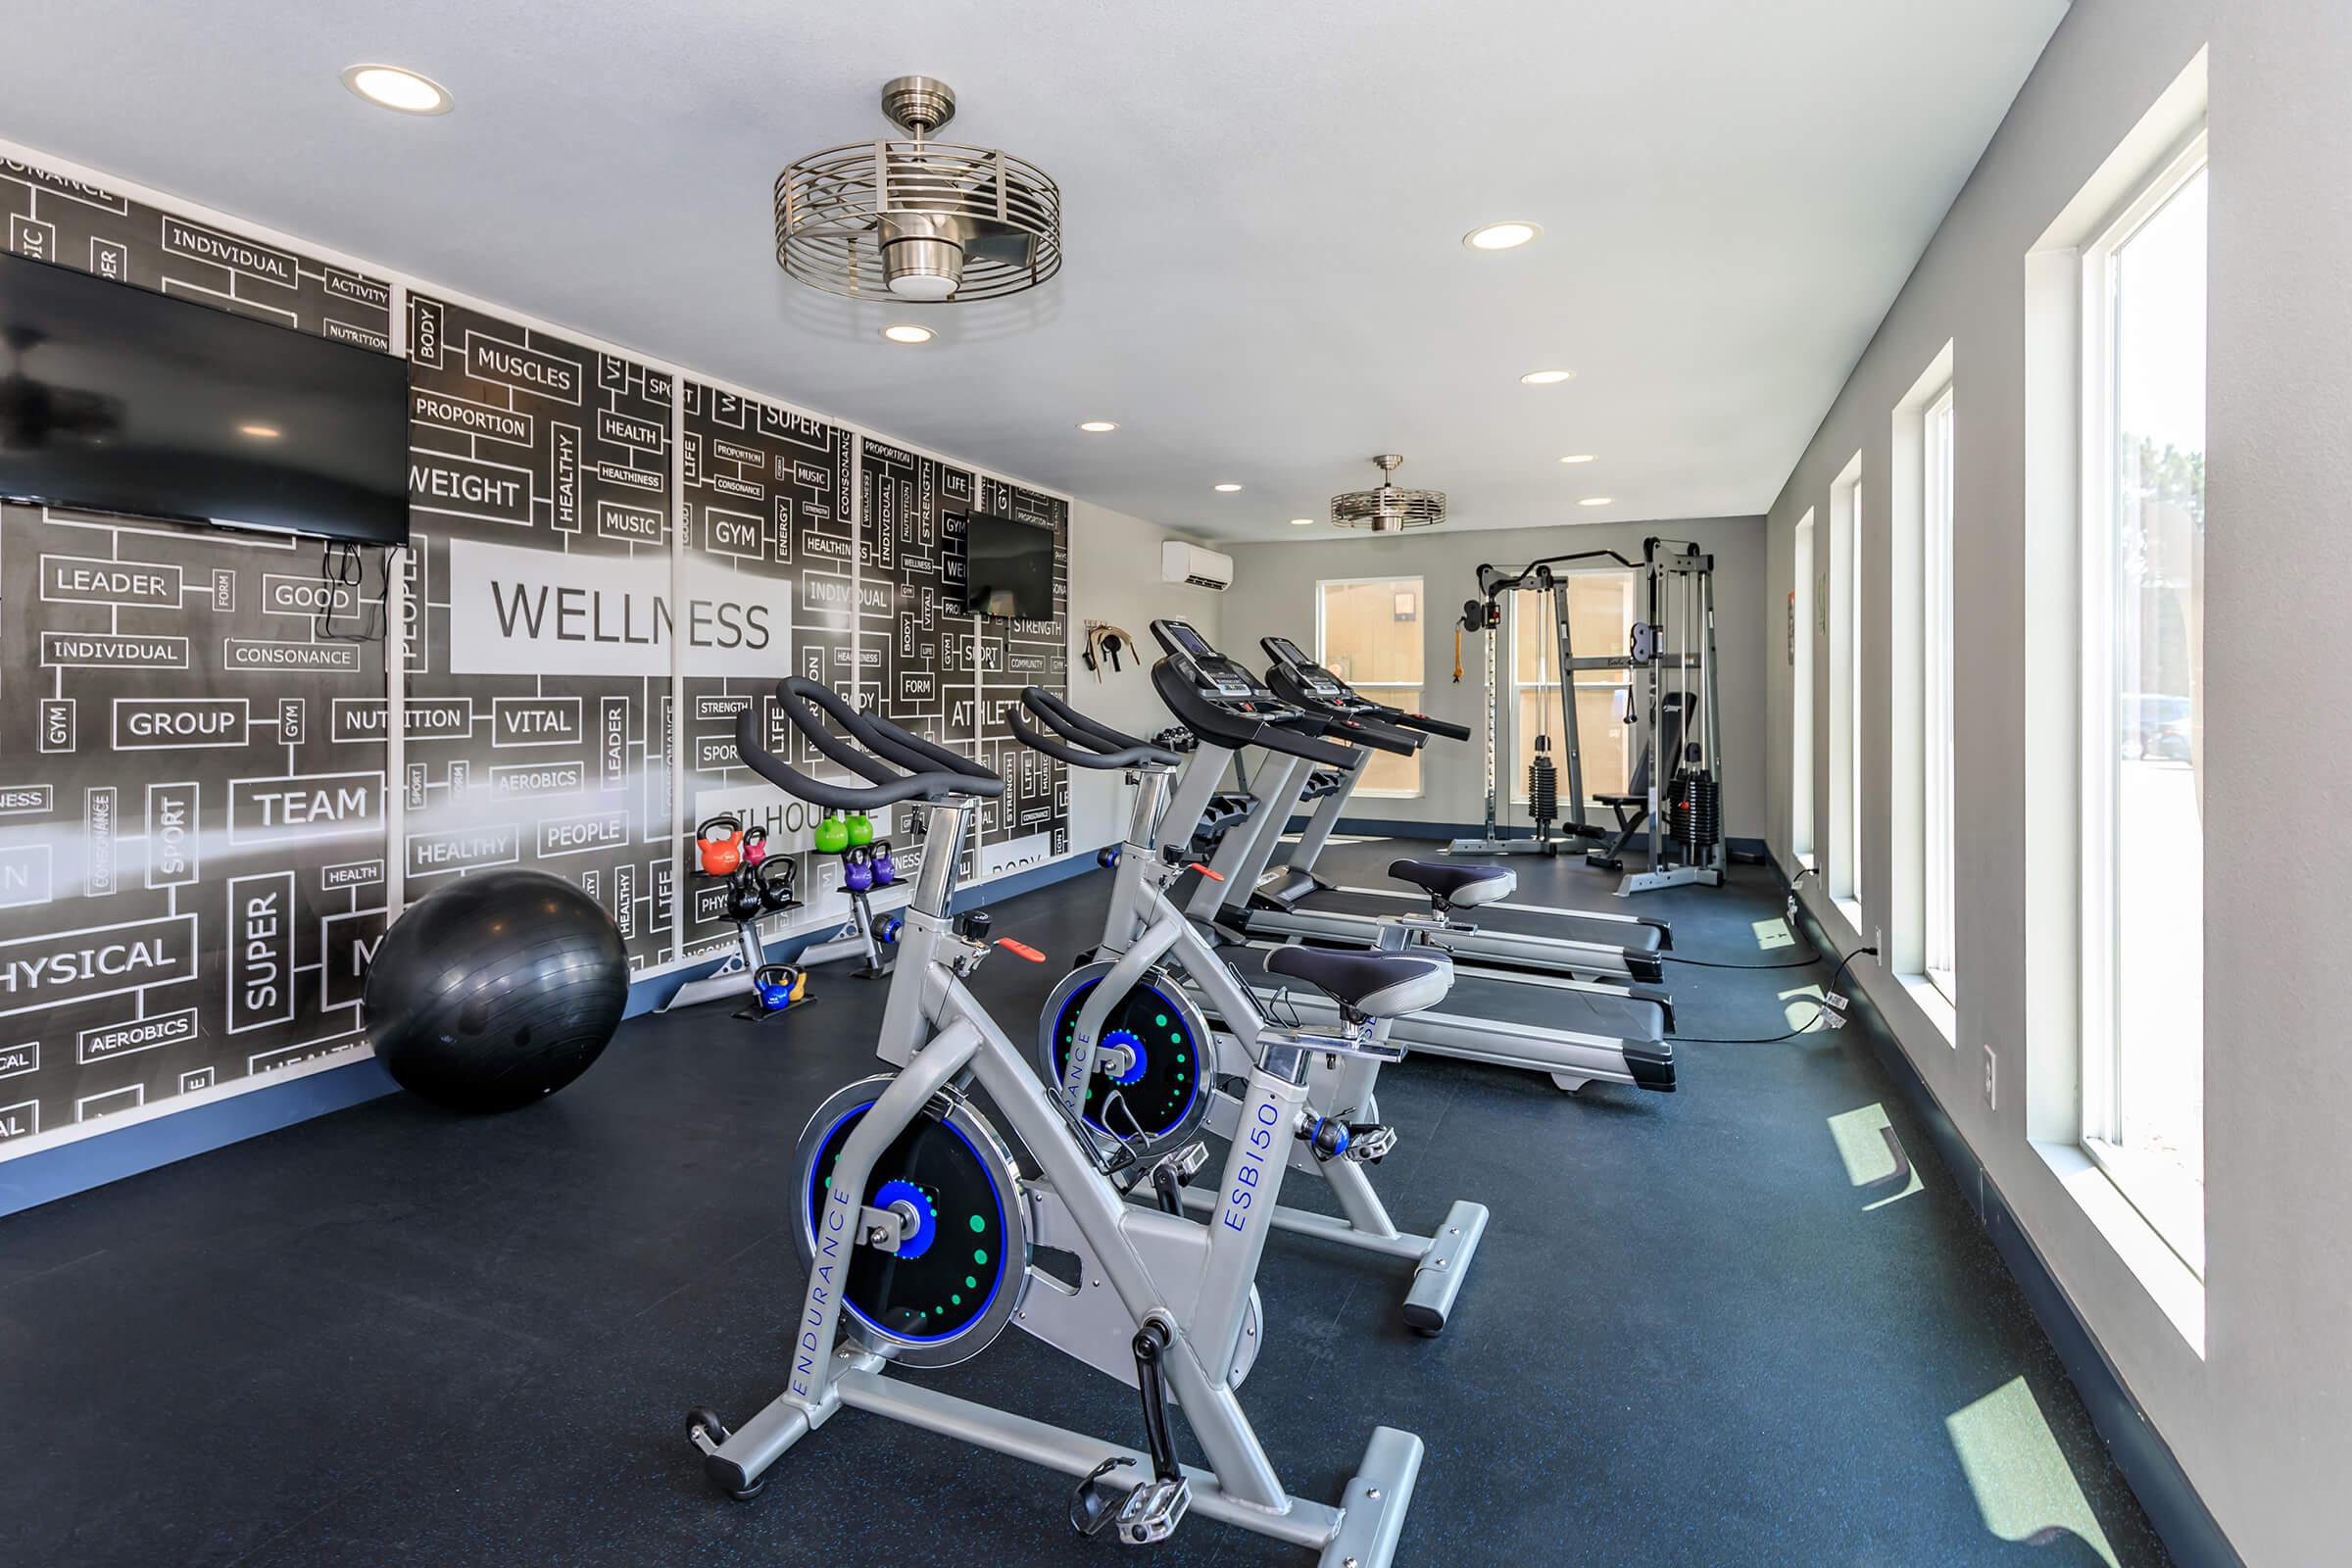 Fitness center at The Oslo, located in Northglenn, CO